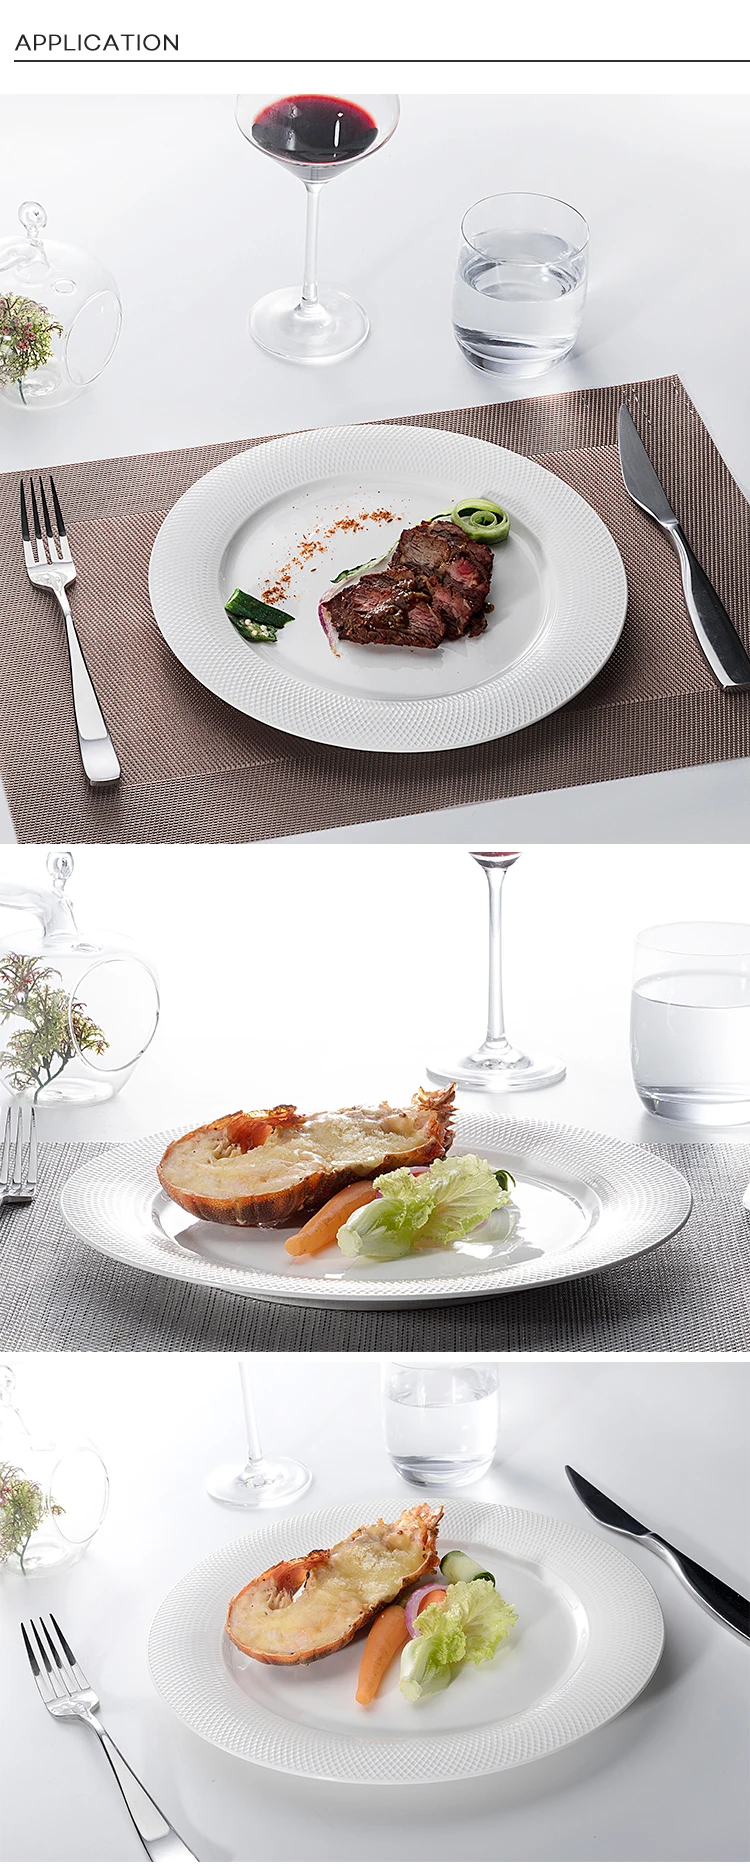 Outdoor lifestyle Hotel Gourmet Industrielle Poterie Vaisselle, Grid Style Crockery Tableware Catering Dinner Plates^